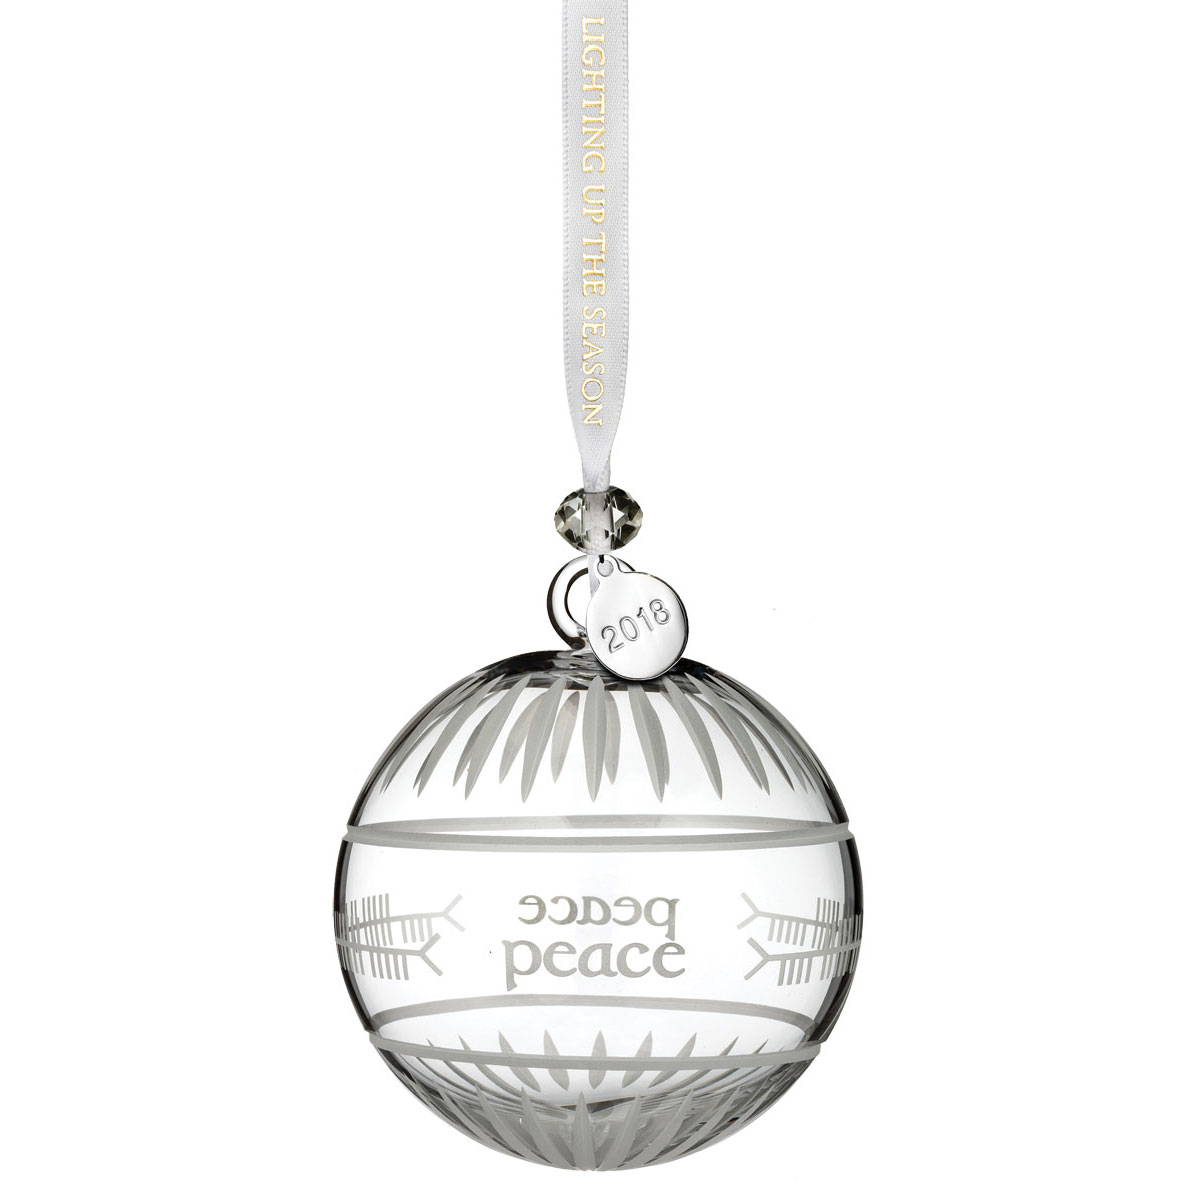 Waterford Crystal 2018 Ogham Peace Ball Ornament